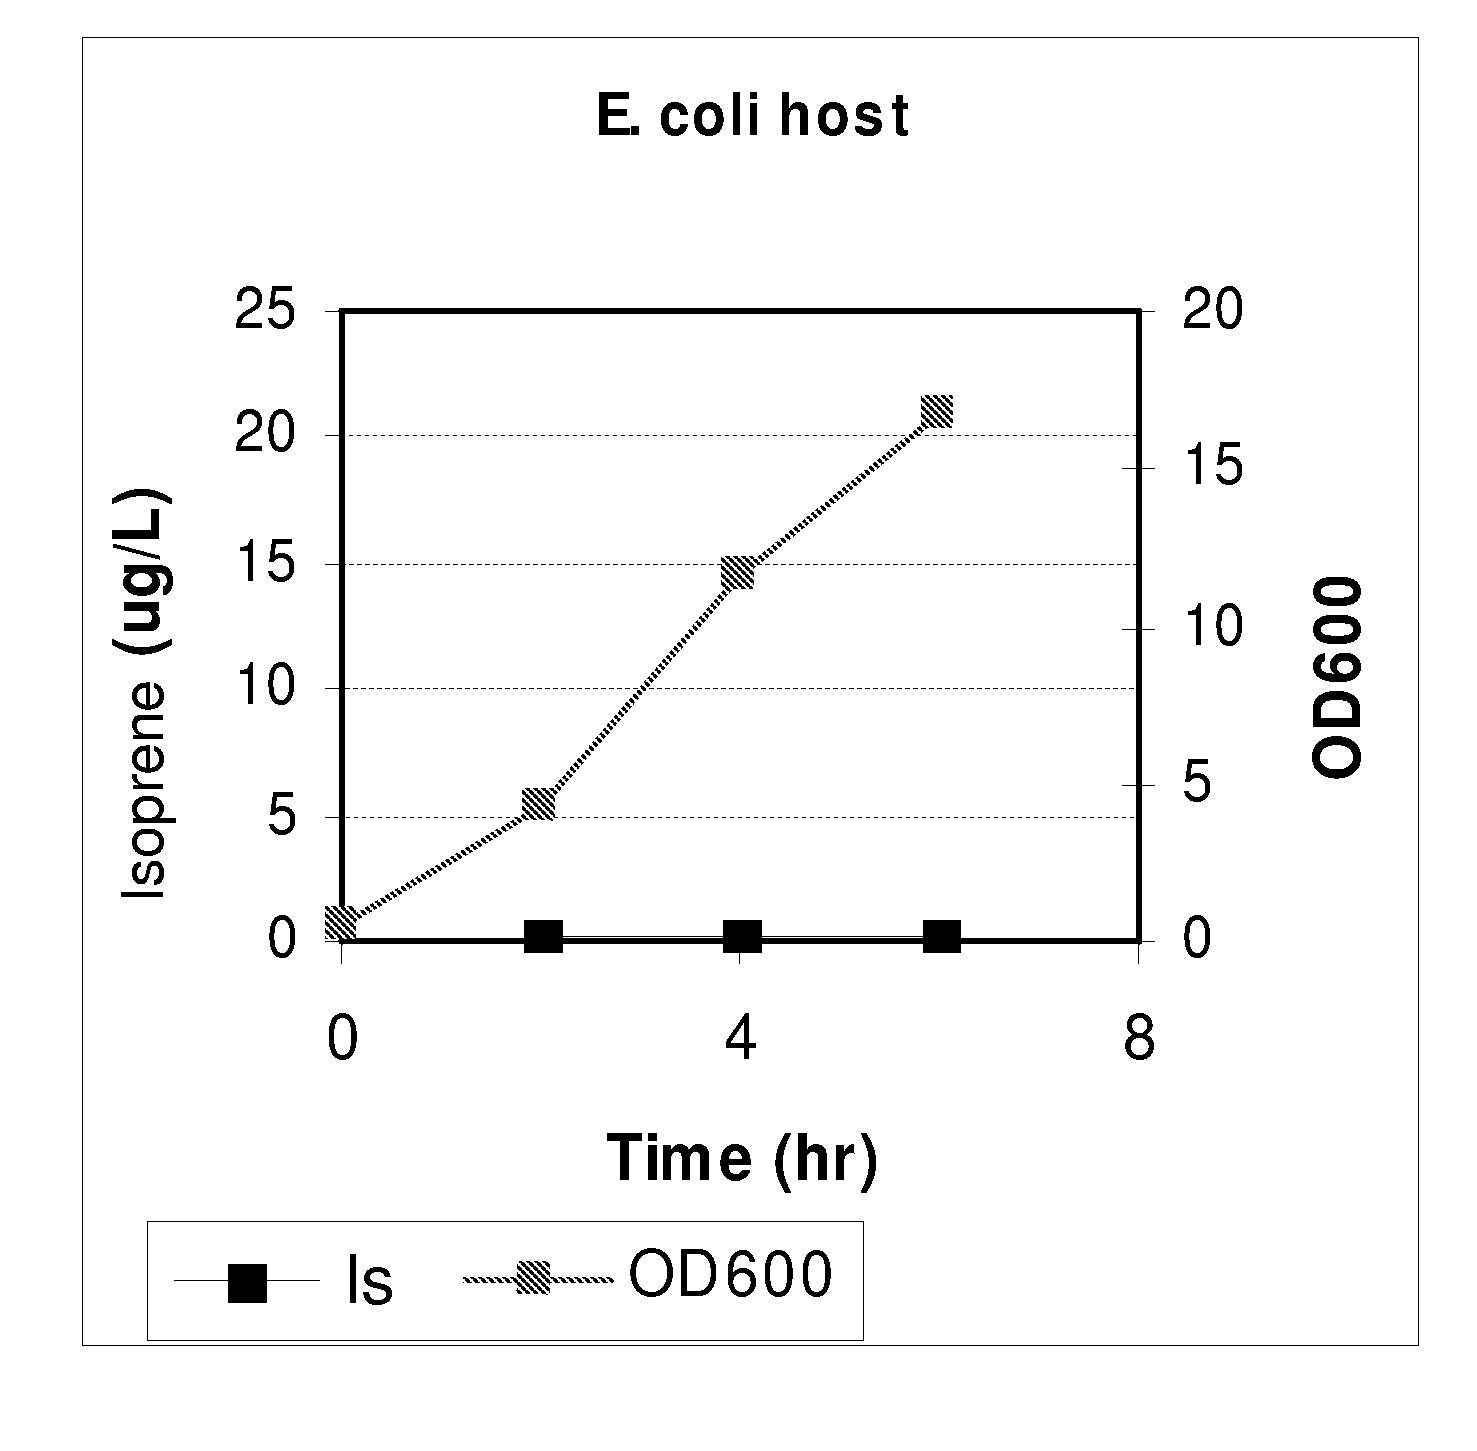 Compositions and methods for producing isoprene free of c5 hydrocarbons under decoupling conditions and/or safe operating ranges